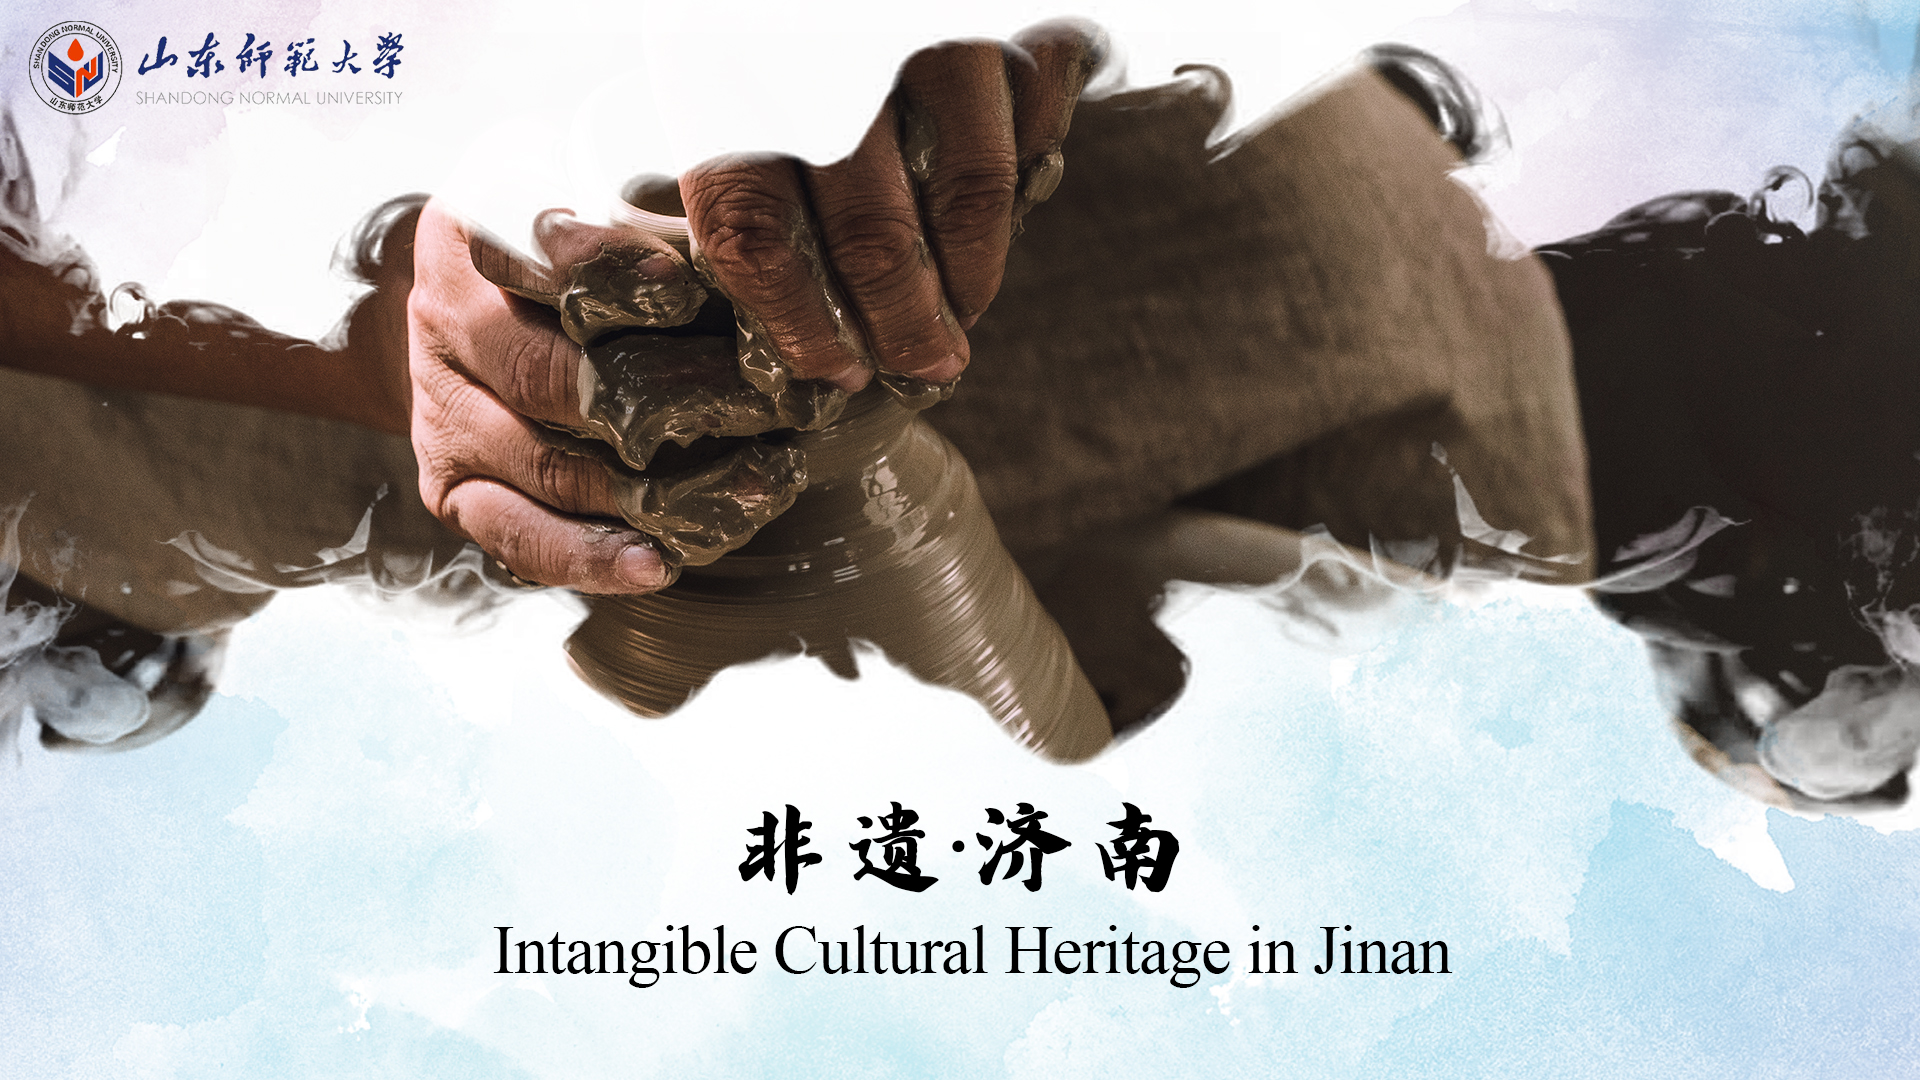 Intangible Cultural Heritage in Jinan